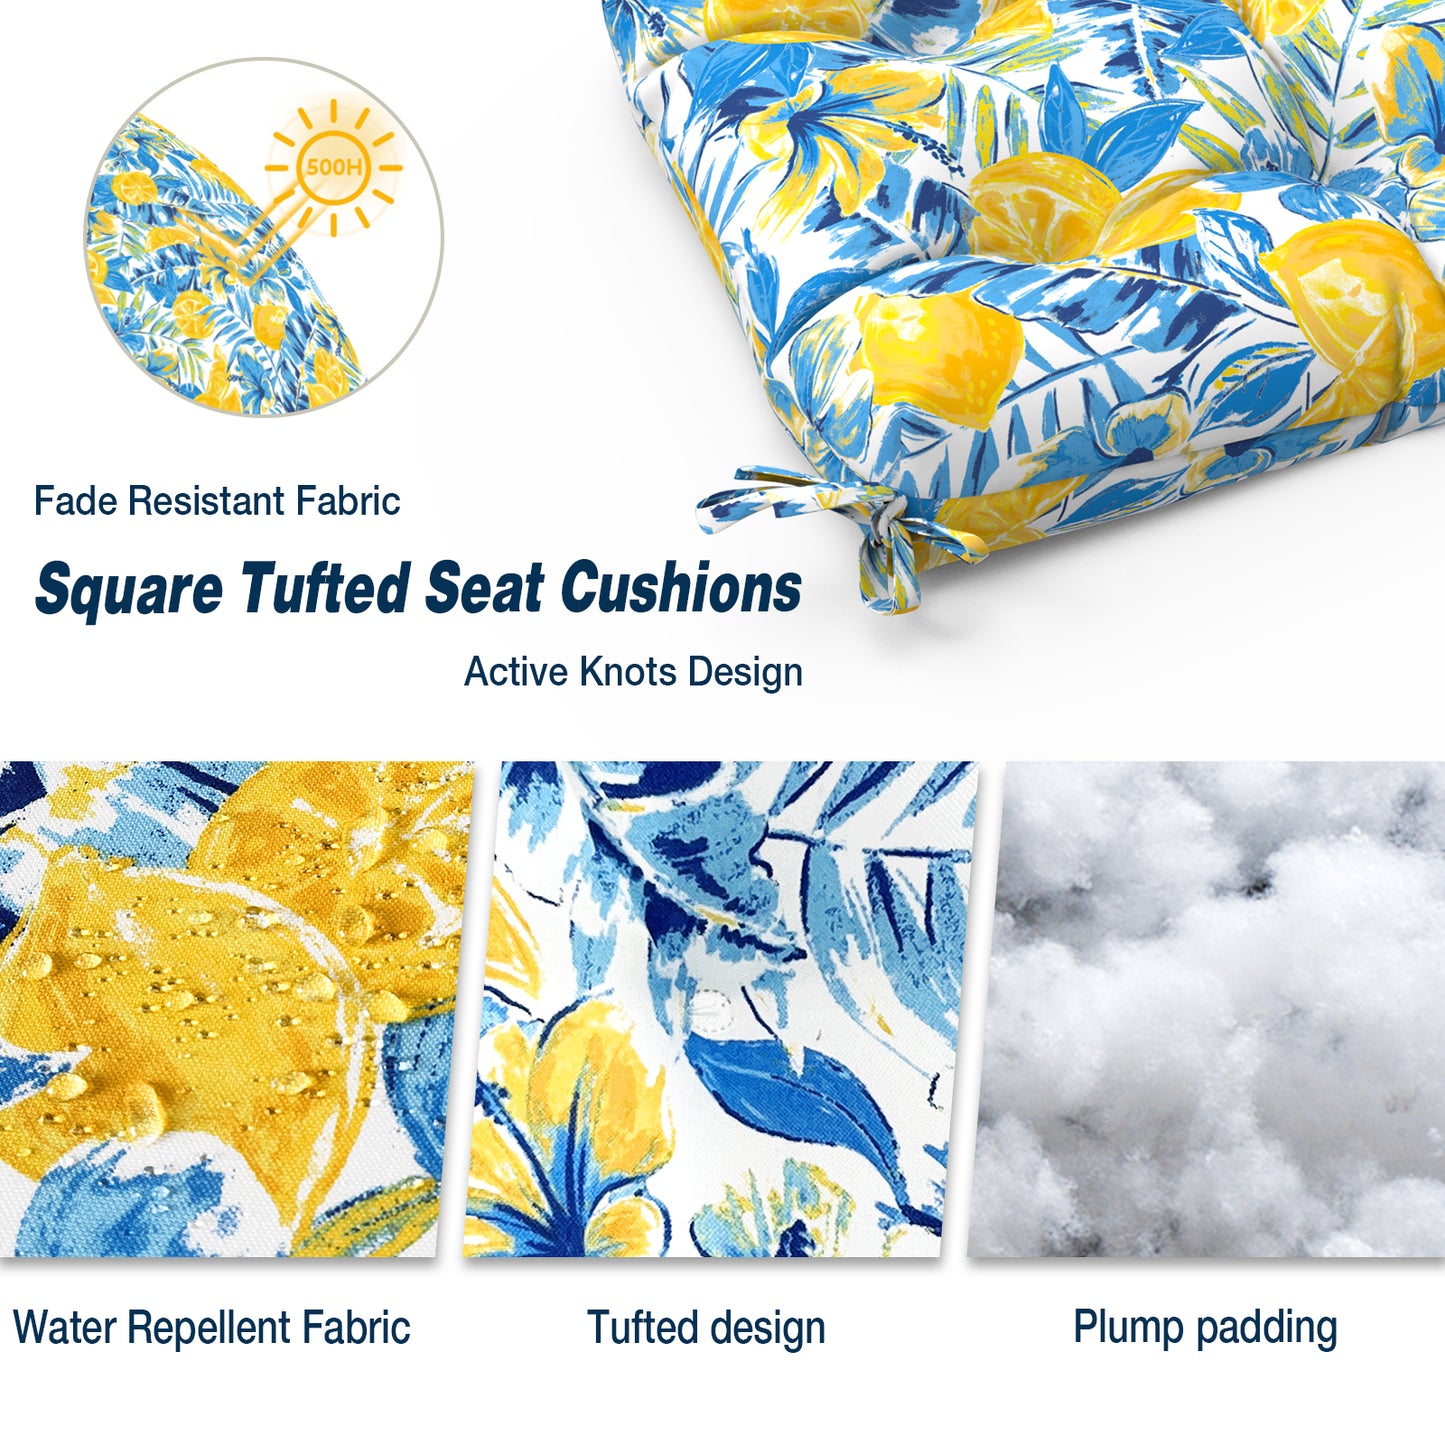 Melody Elephant Indoor/Outdoor Square Tufted Seat Cushions with Ties, Fade Resistant Patio Wicker Thick Chair Pads Pack of 2, 19 x 19 x 5 Inch, Lemon Blossom Blue